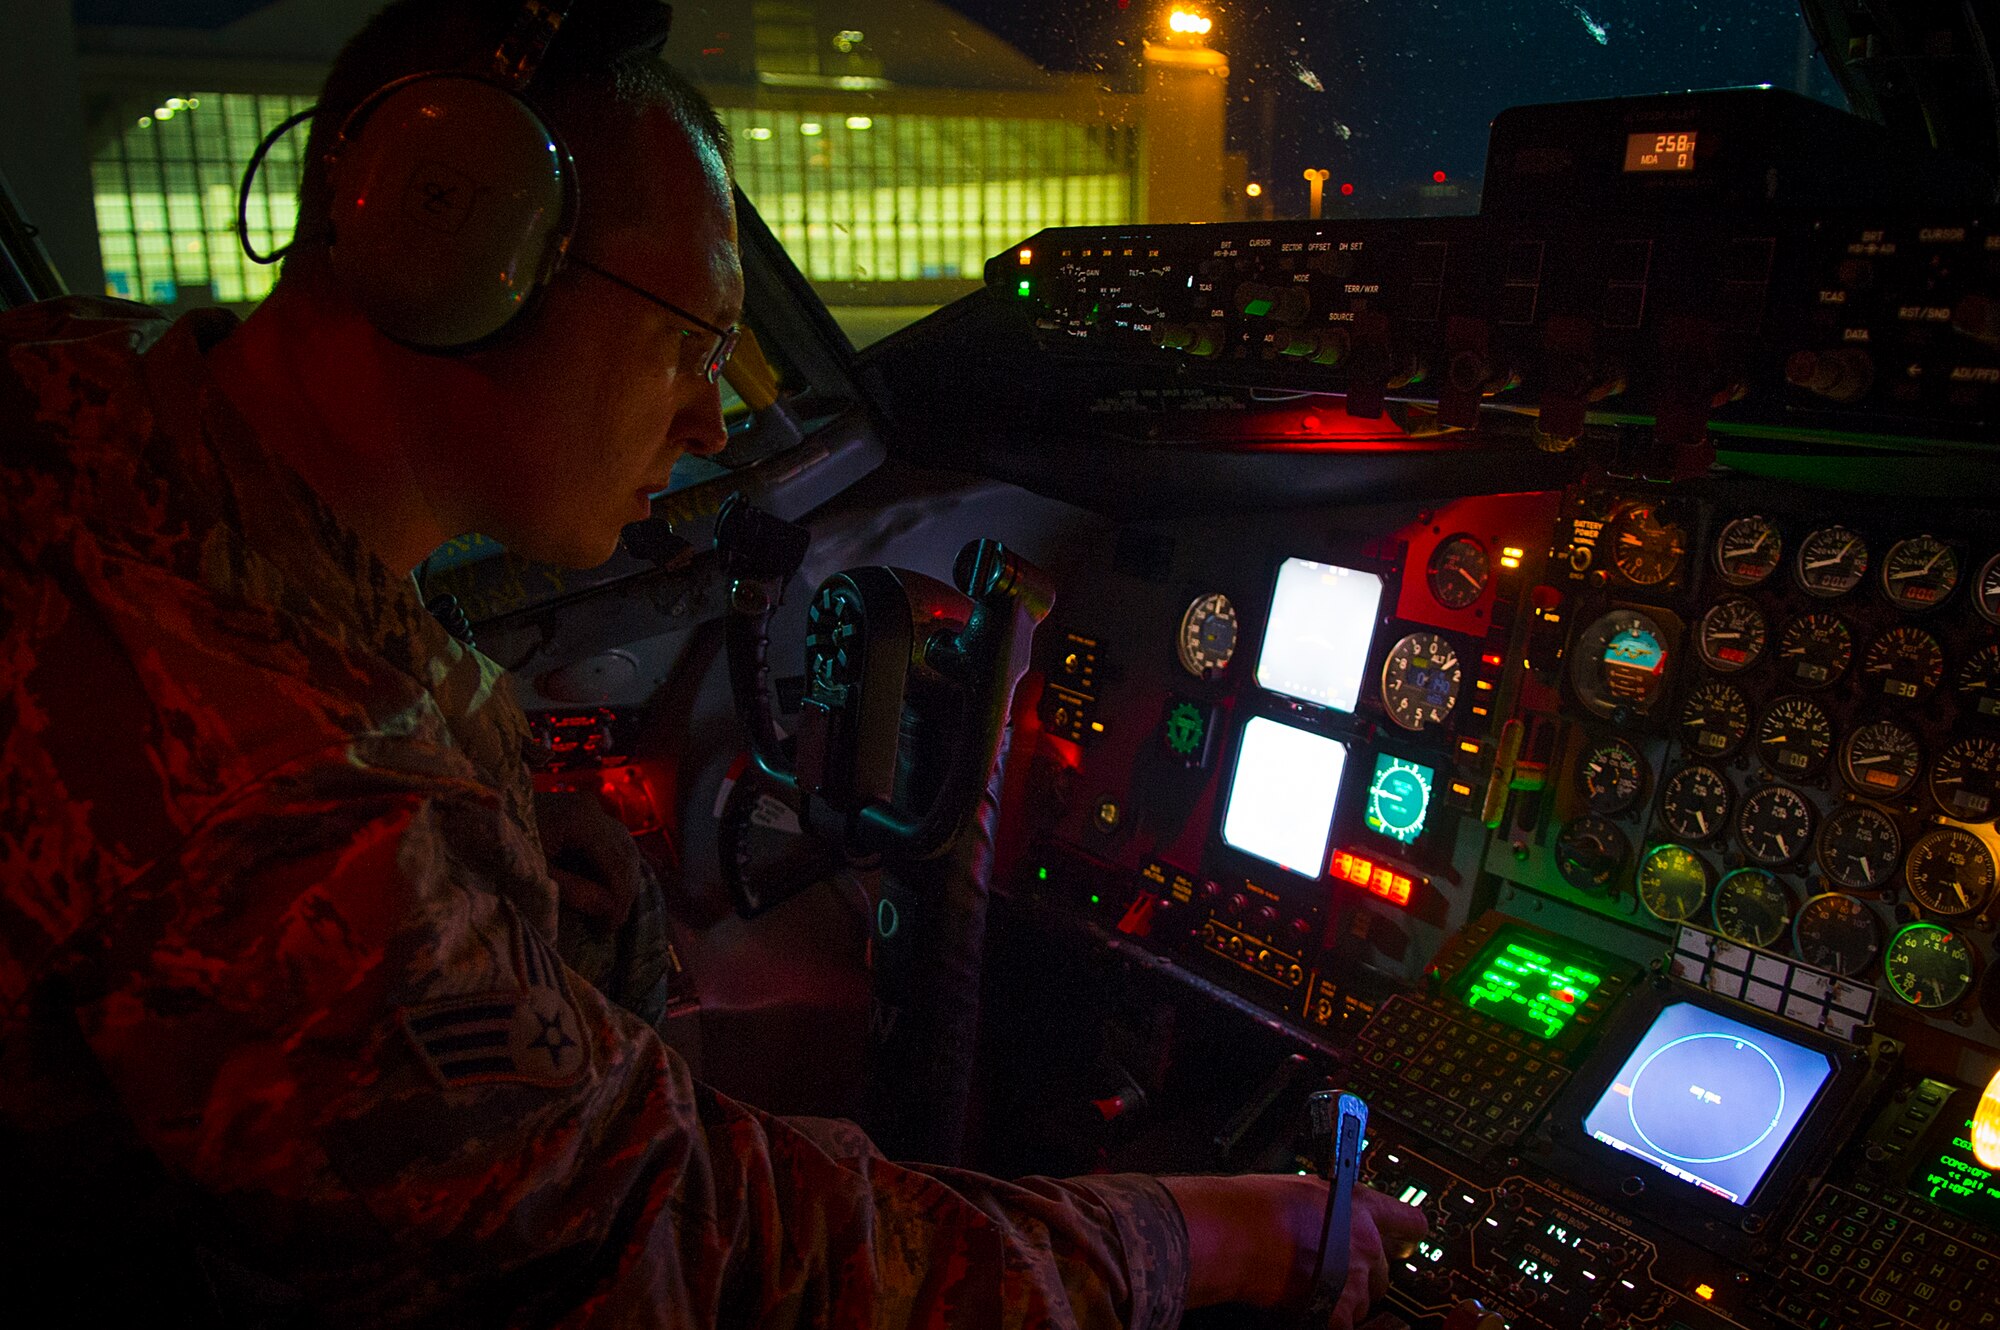 Senior Airman Joshua Dobrowski, 6th Aircraft Maintenance Squadron crew chief, checks KC-135 Stratotanker internal cockpit lights and nose landing lights during a preflight inspection at MacDill Air Force Base, Fla., March 26, 2015. The landing gears, electronics systems and the structure of airframe are checked during each preflight inspection. (U.S. Air Force photo by Senior Airman Ned T. Johnston/Released)